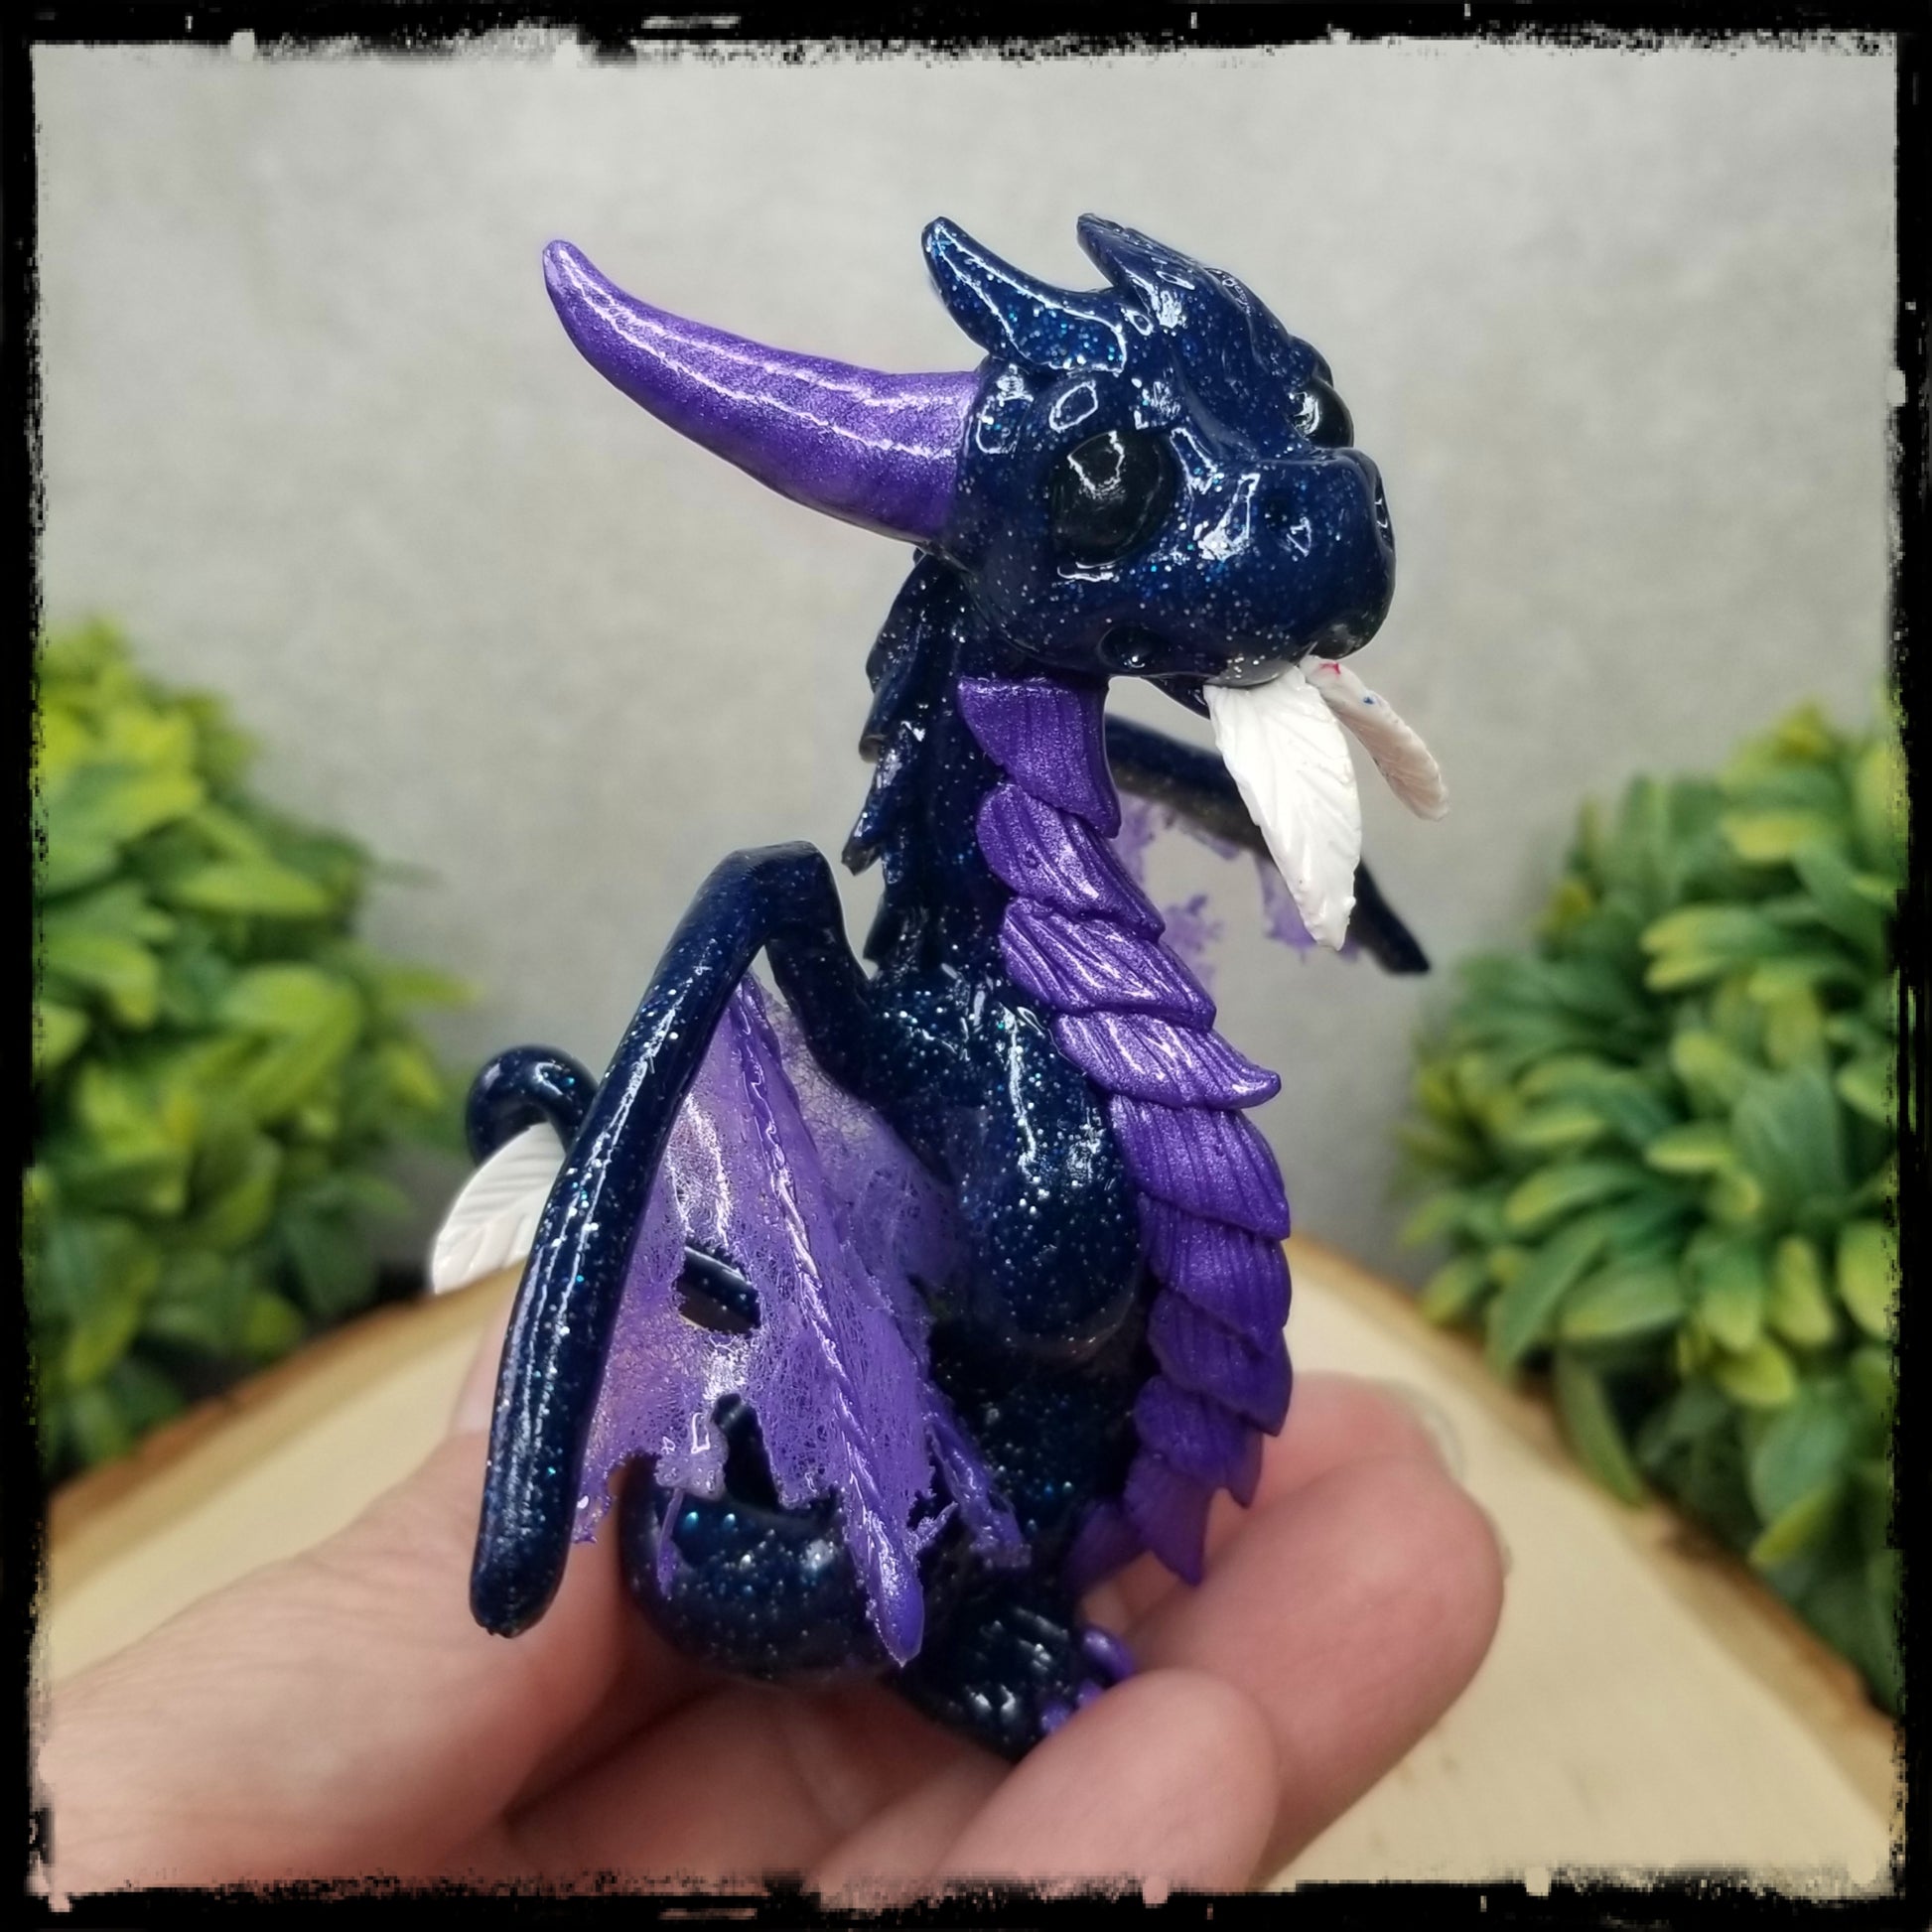 Skirith - Original Hand Sculpted Dragon with Cupid's Bow